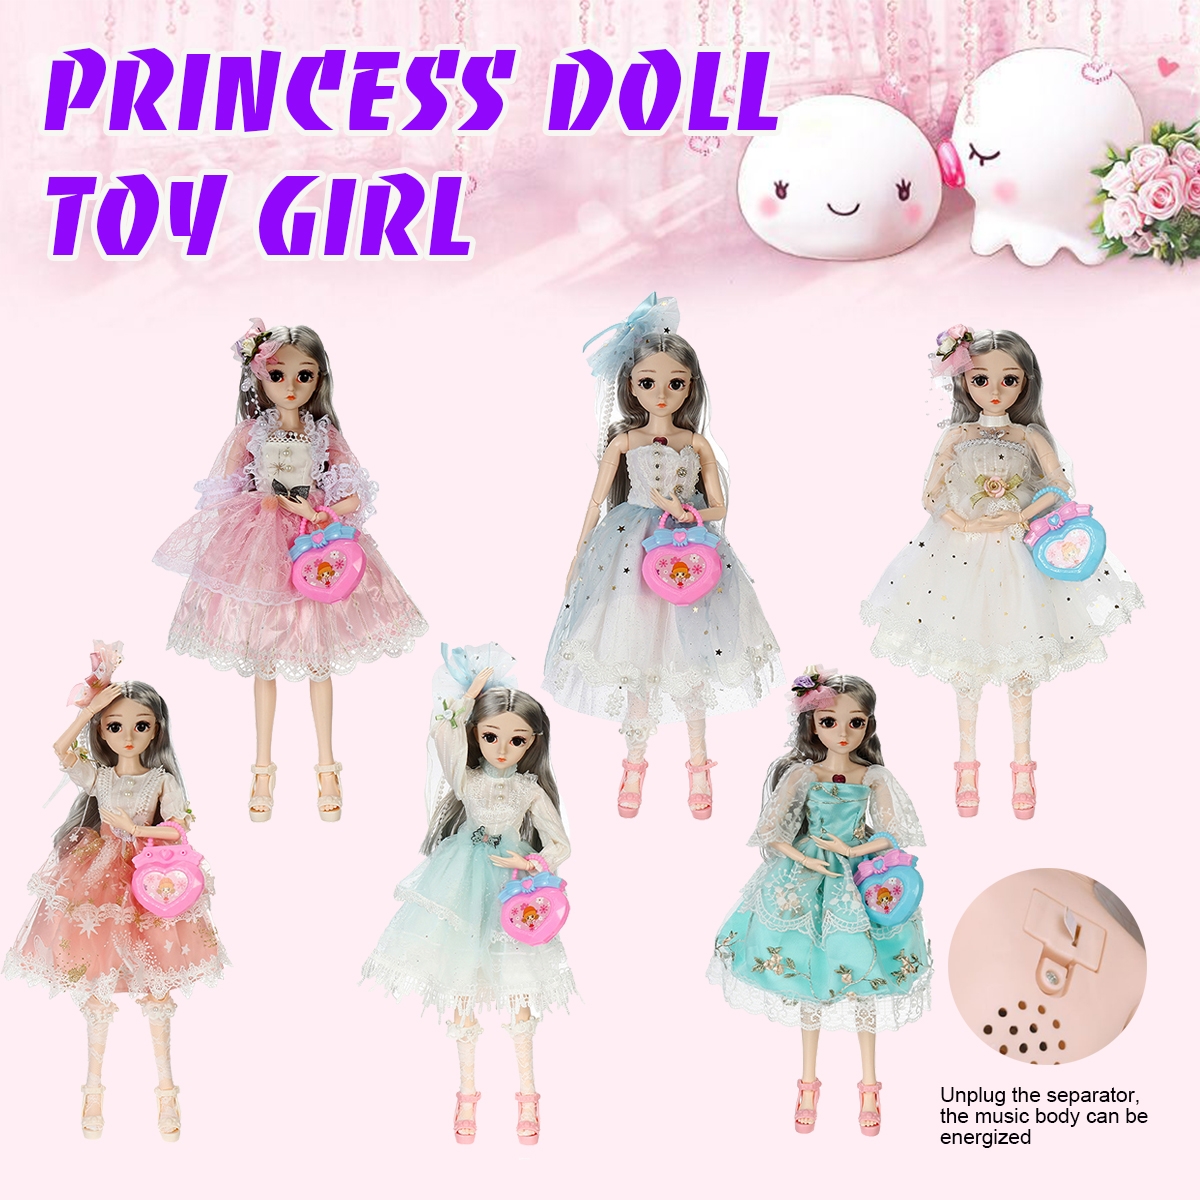 26 Joints Rotatable Princess Doll Action Figure Model Toy with Sound Light for Kids Gift